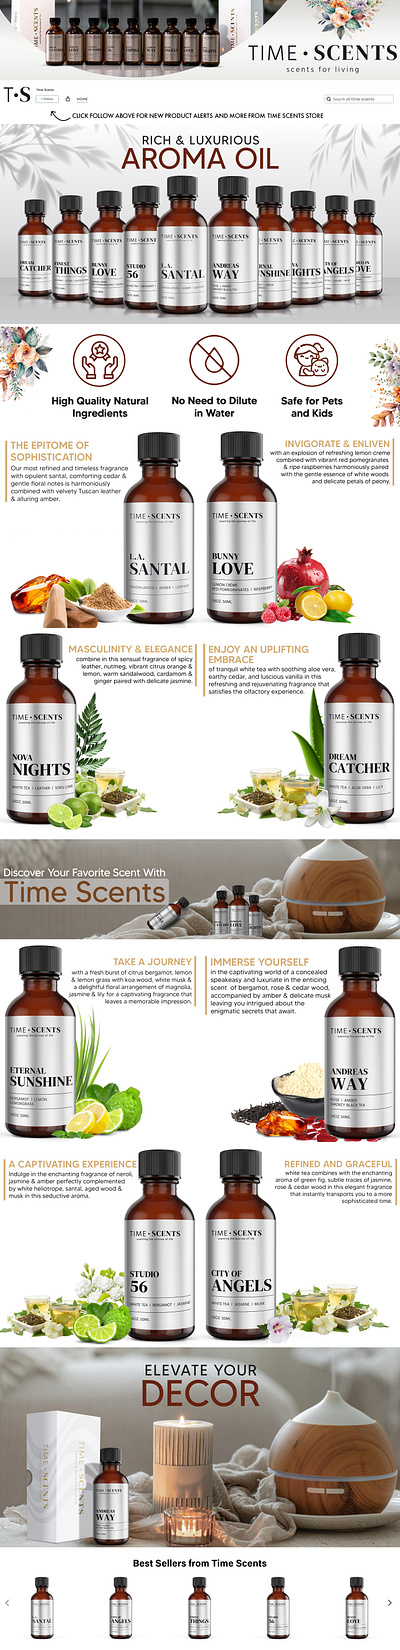 AMAZON STOREFRONT | TIME SCENTS a content amazon amazon design amazon ebc amazon ebc a content design design graphic design product design